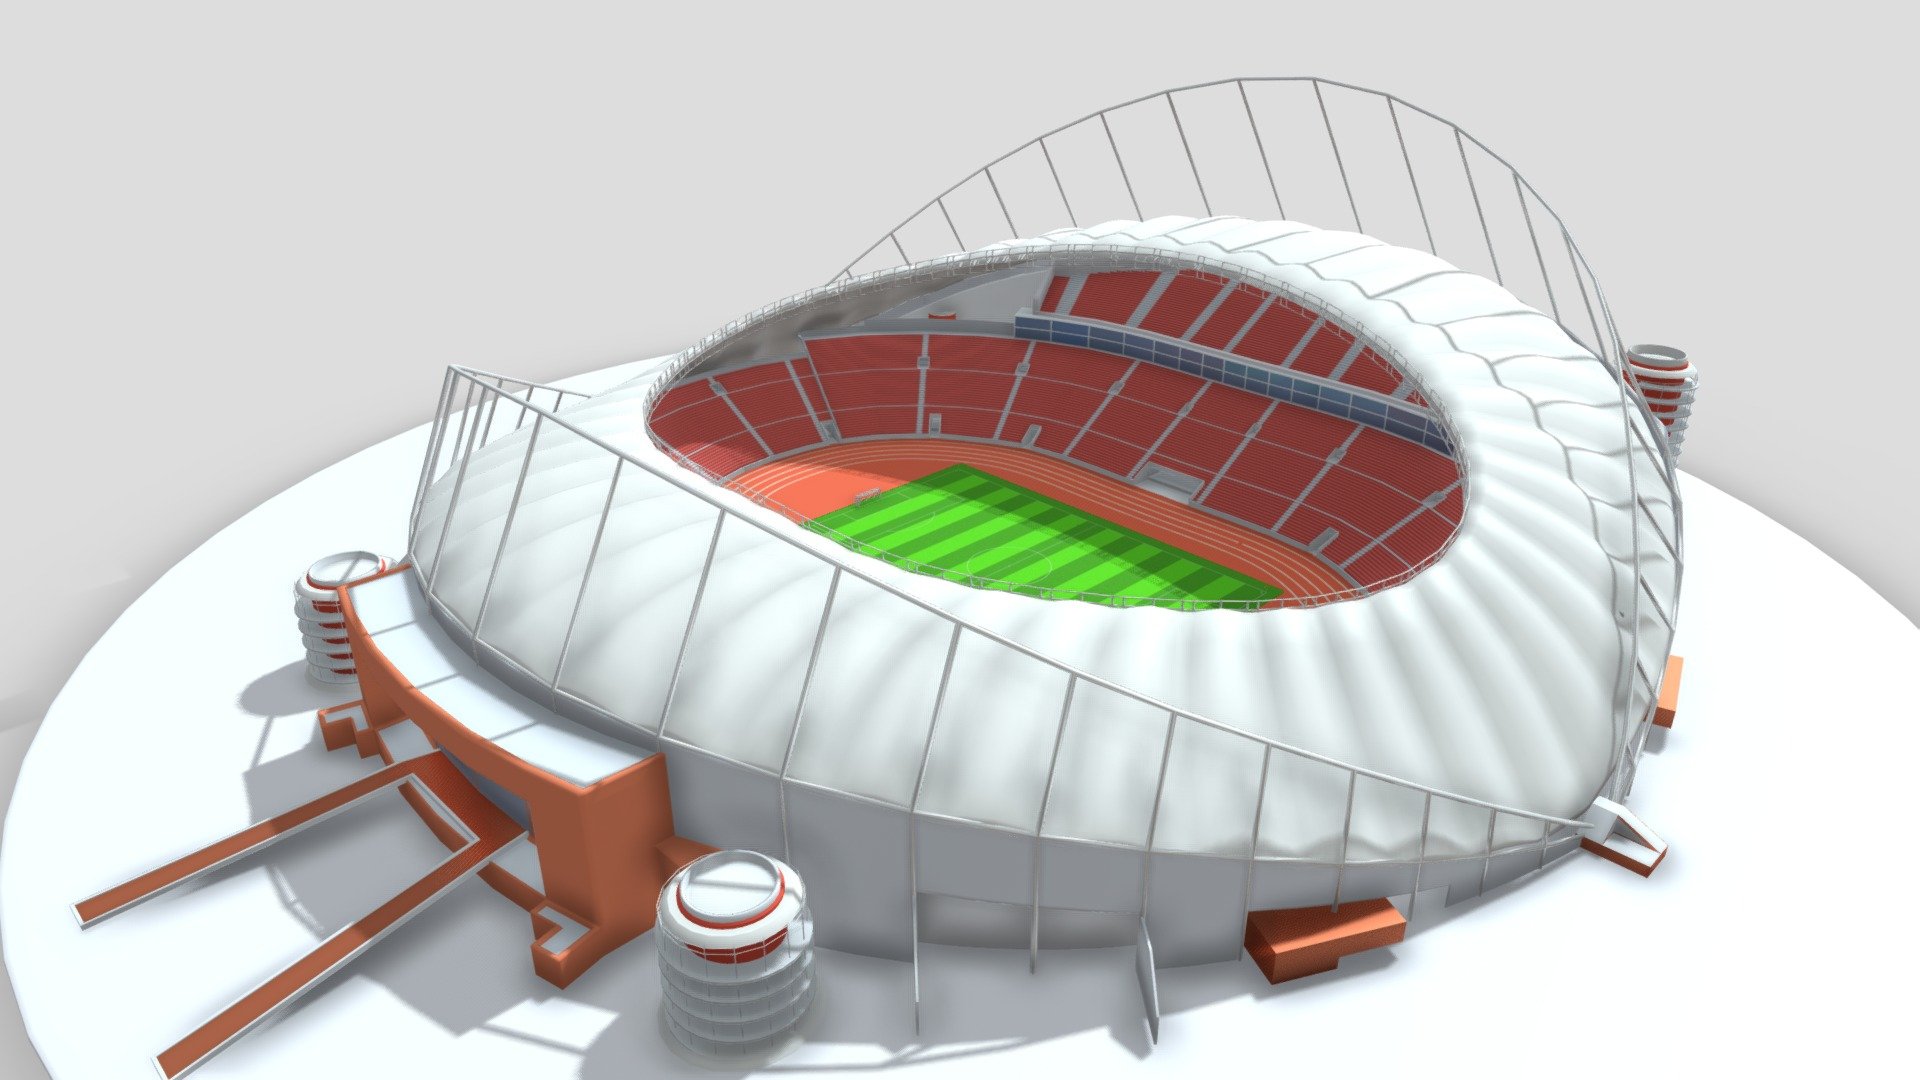 The Khalifa International Stadium, also known as the National Stadium, is a multi-purpose stadium located in the city of Doha, Qatar. It is the official headquarters of the Qatar football team 3d model